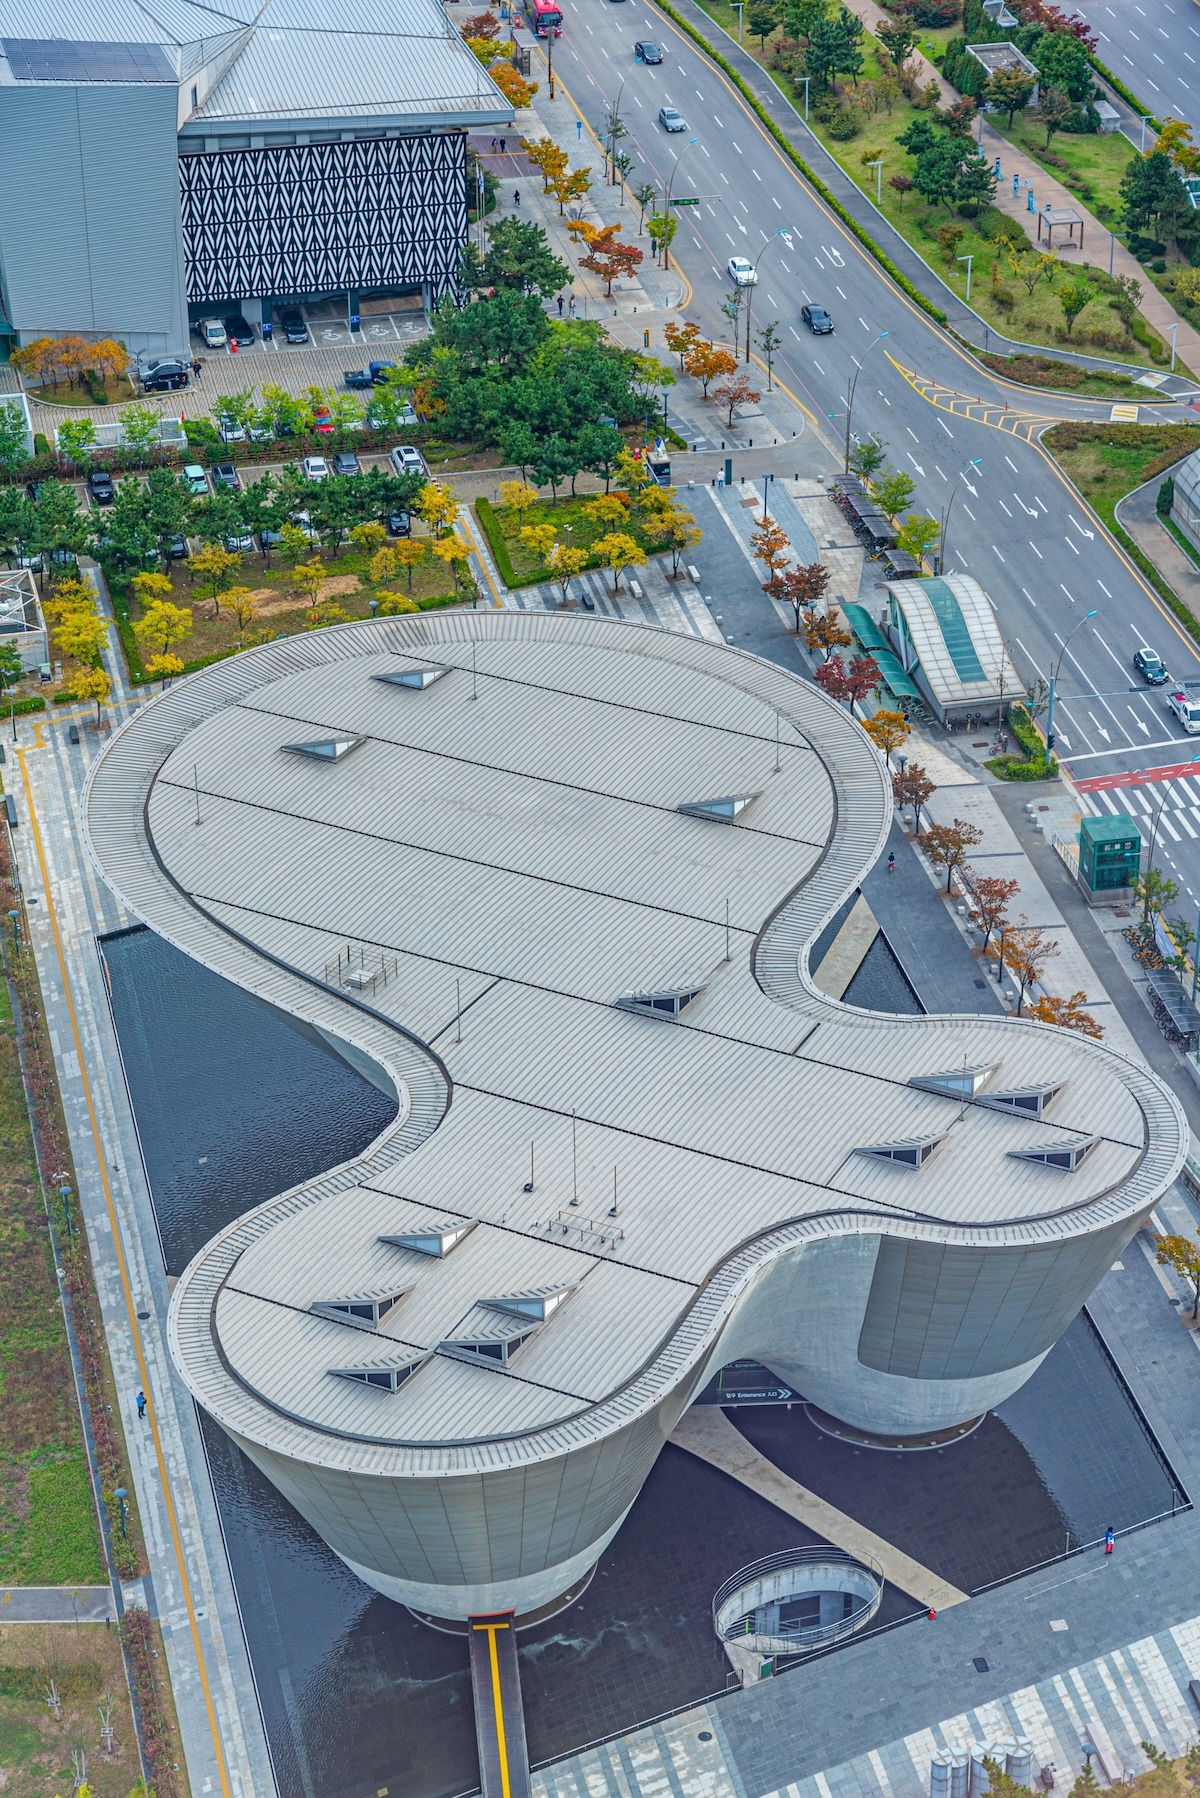 Aerial view of Tri-bowl cultural center in Incheon.